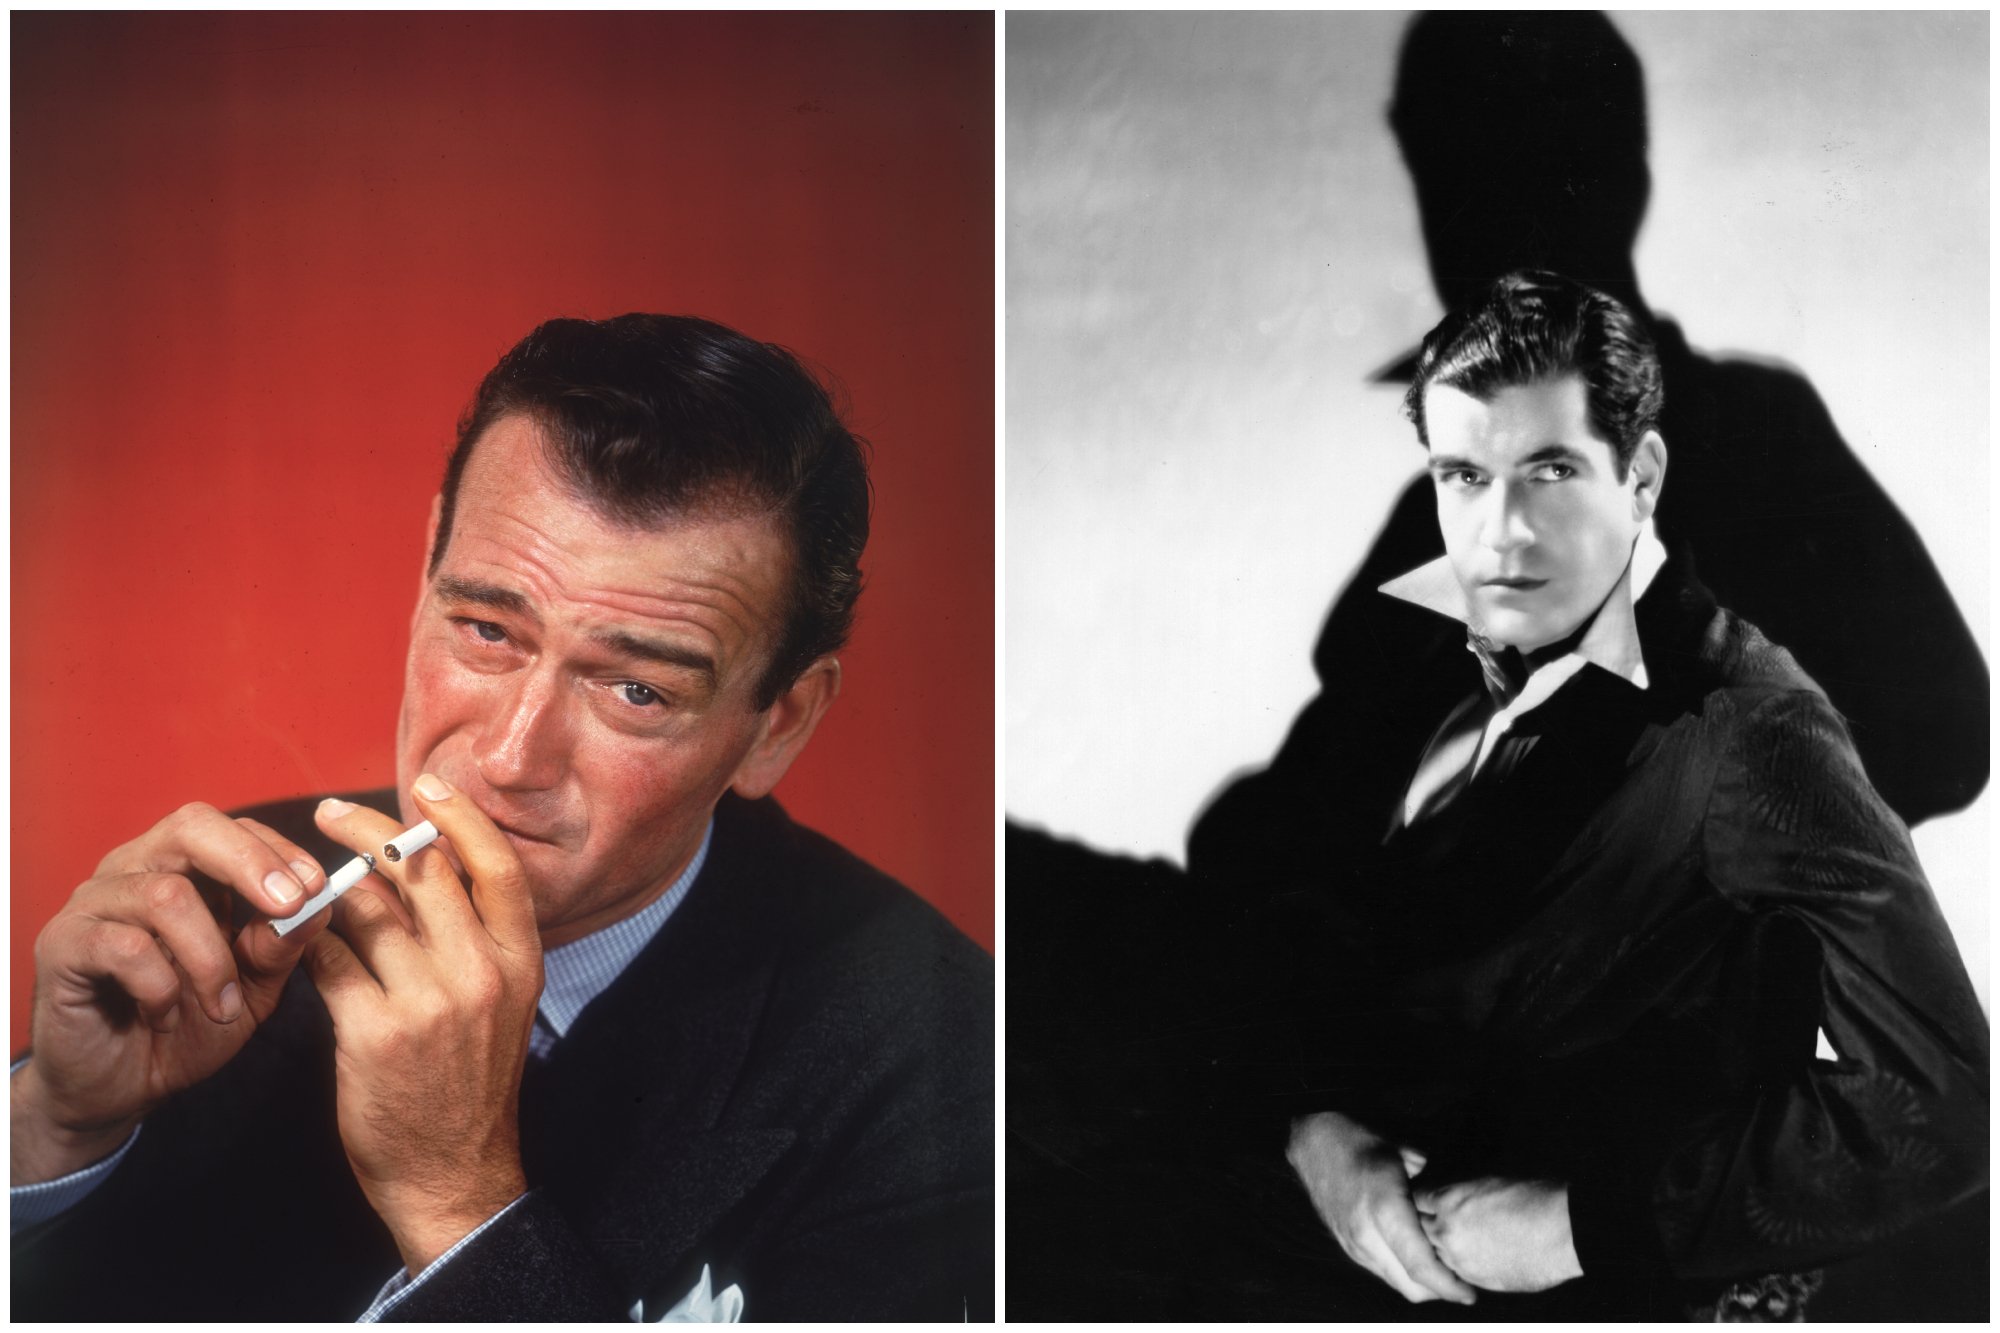 John Wayne and Grant Withers, who played a prank on each other. Wayne is lighting a cigarette with another cigarette in front of a red background. Withers is in a black-and-white picture posing with a dark shadow behind him.